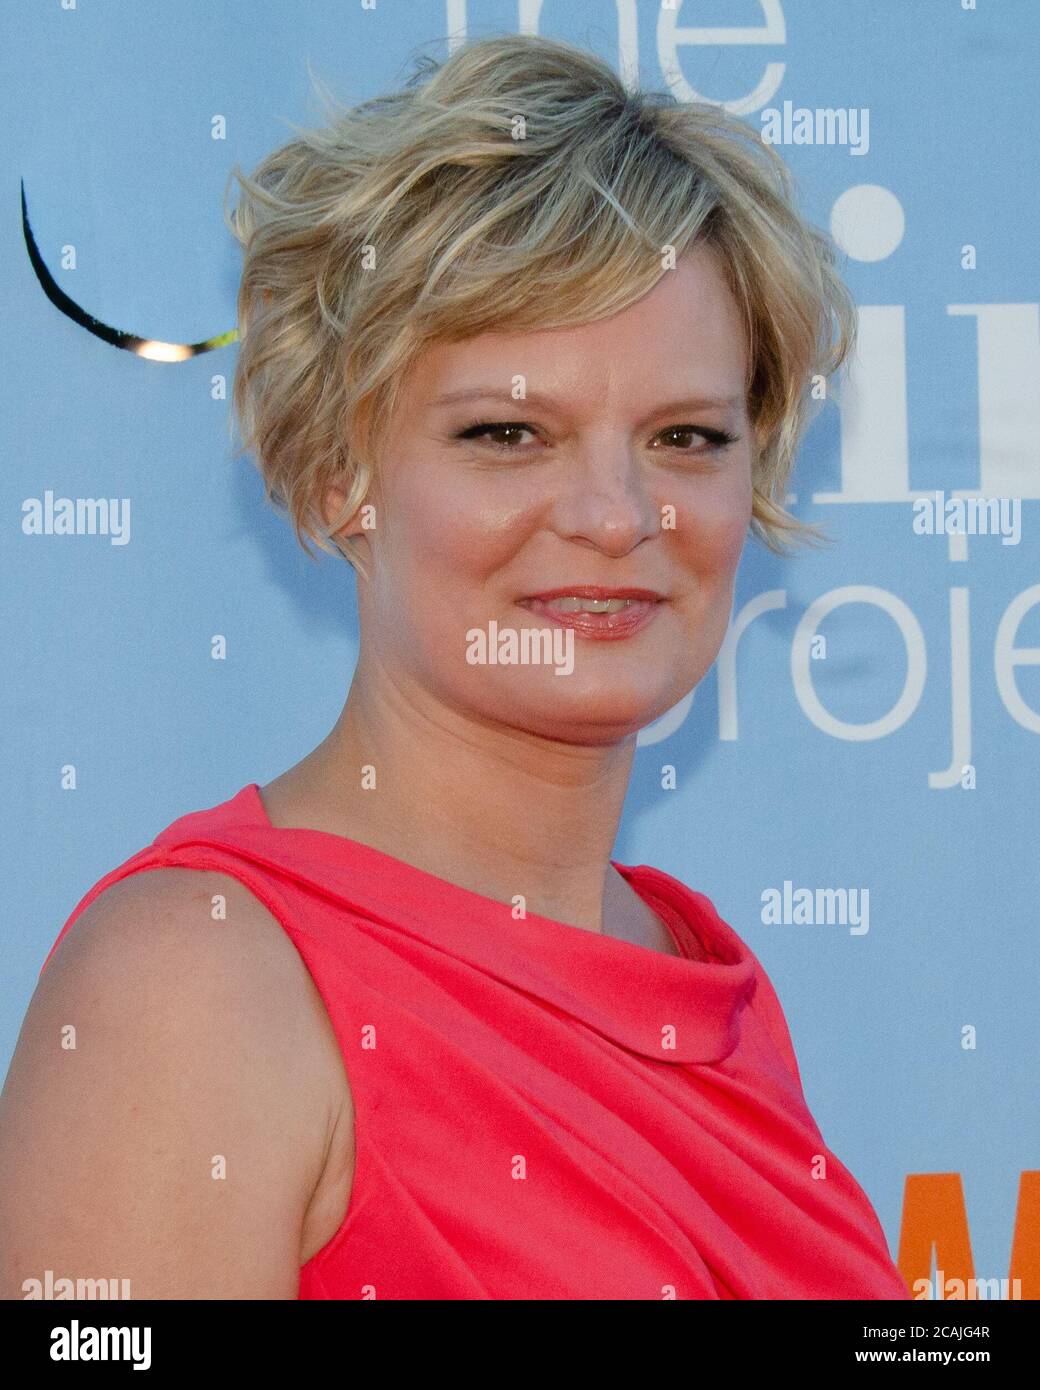 August 26, 2012, Santa Monica, California, USA: Martha Plimpton attends the New FOX Tuesday screening event with live Q&A held at The Broad Stage. (Credit Image: © Billy Bennight/ZUMA Wire) Stock Photo